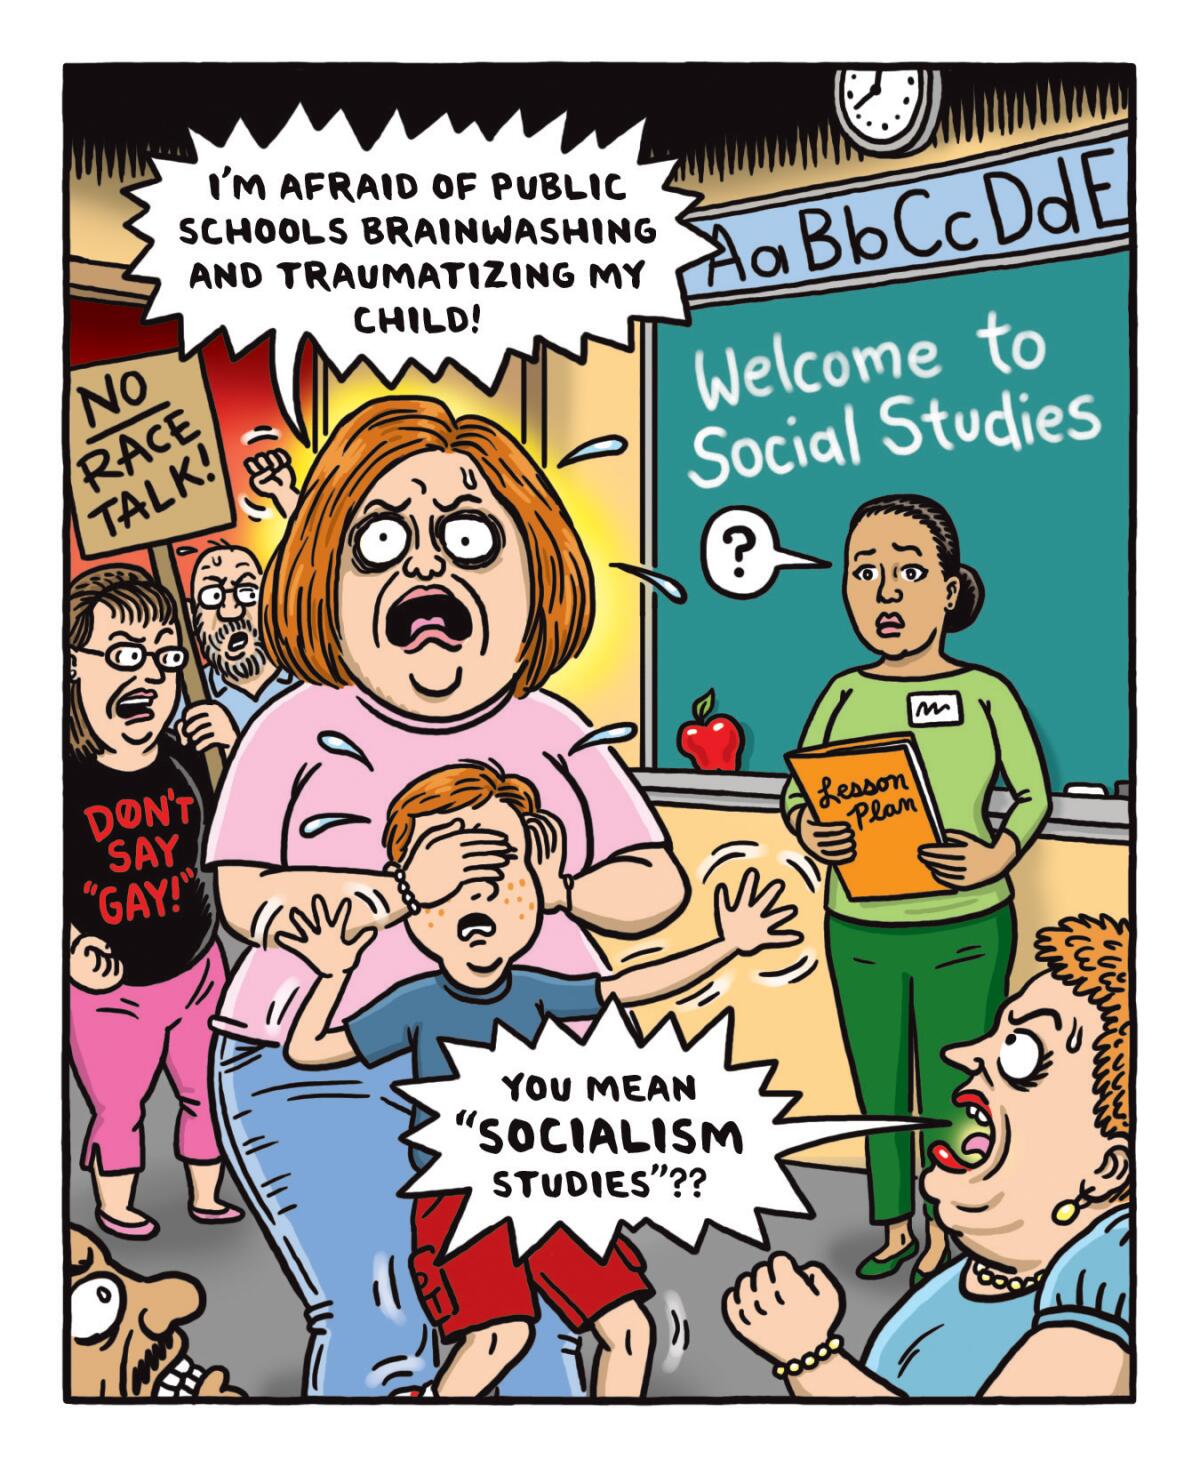 Illustration of a parent covering a child's eyes, a teacher wondering why, and protesters holding signs